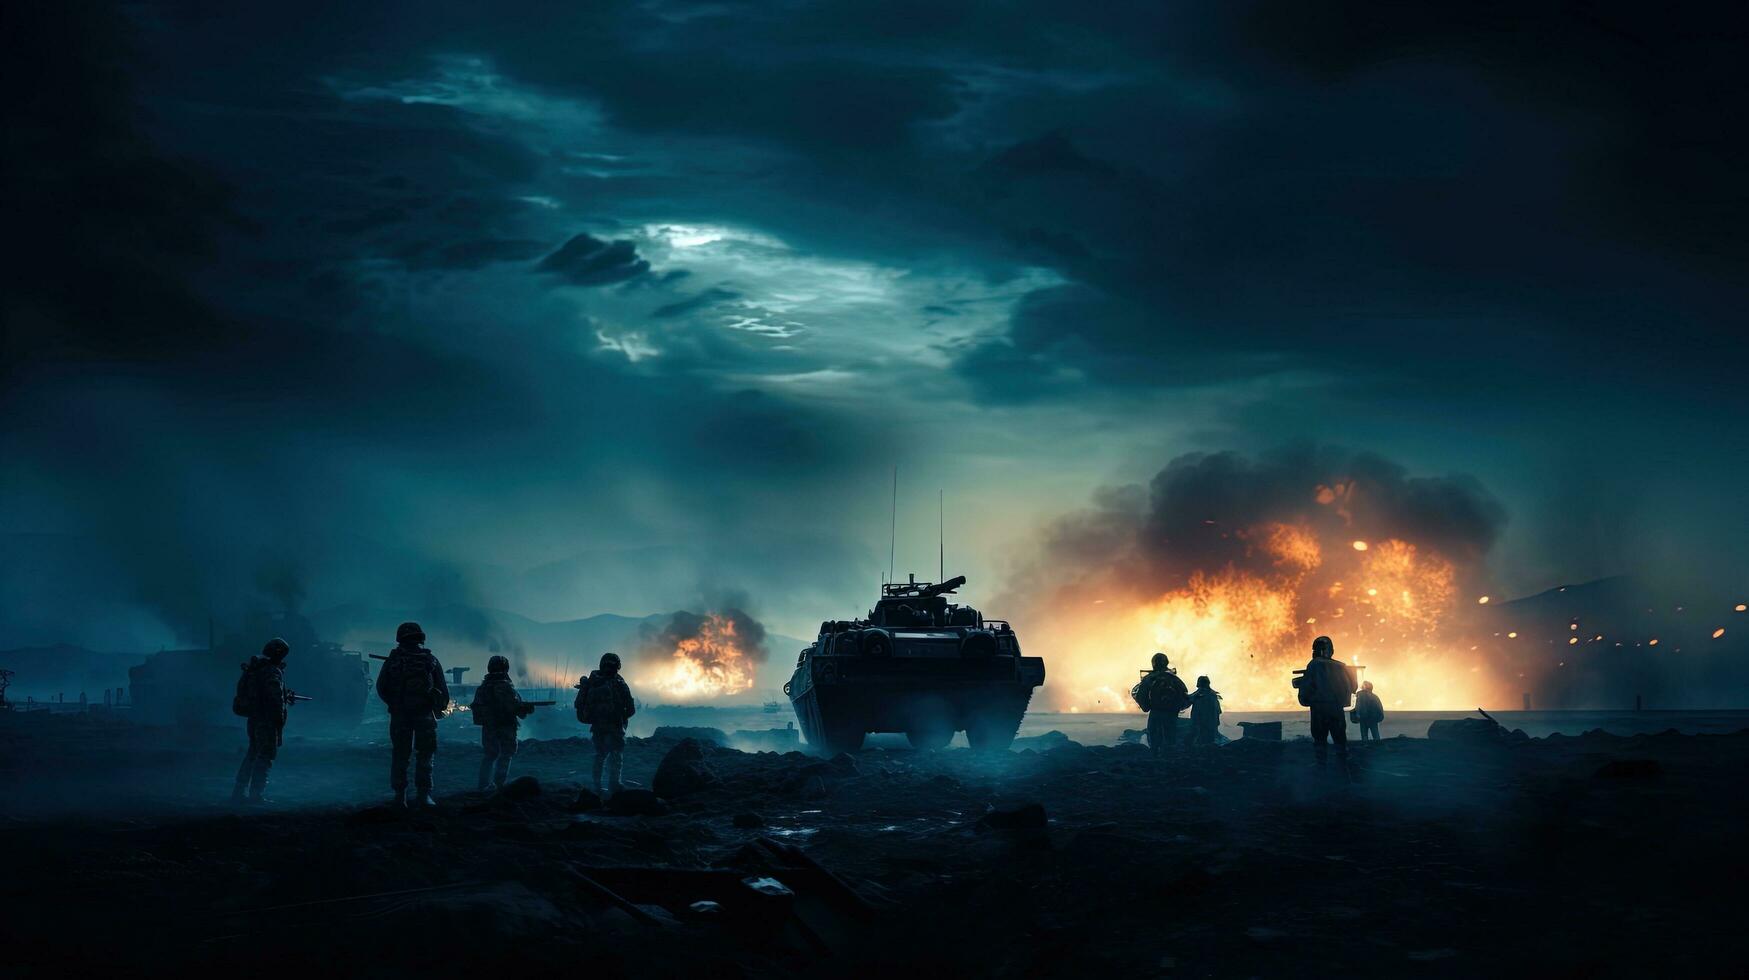 Silhouetted soldiers in a foggy sky below a cloudy skyline at night engaged in battle Armored vehicles included photo